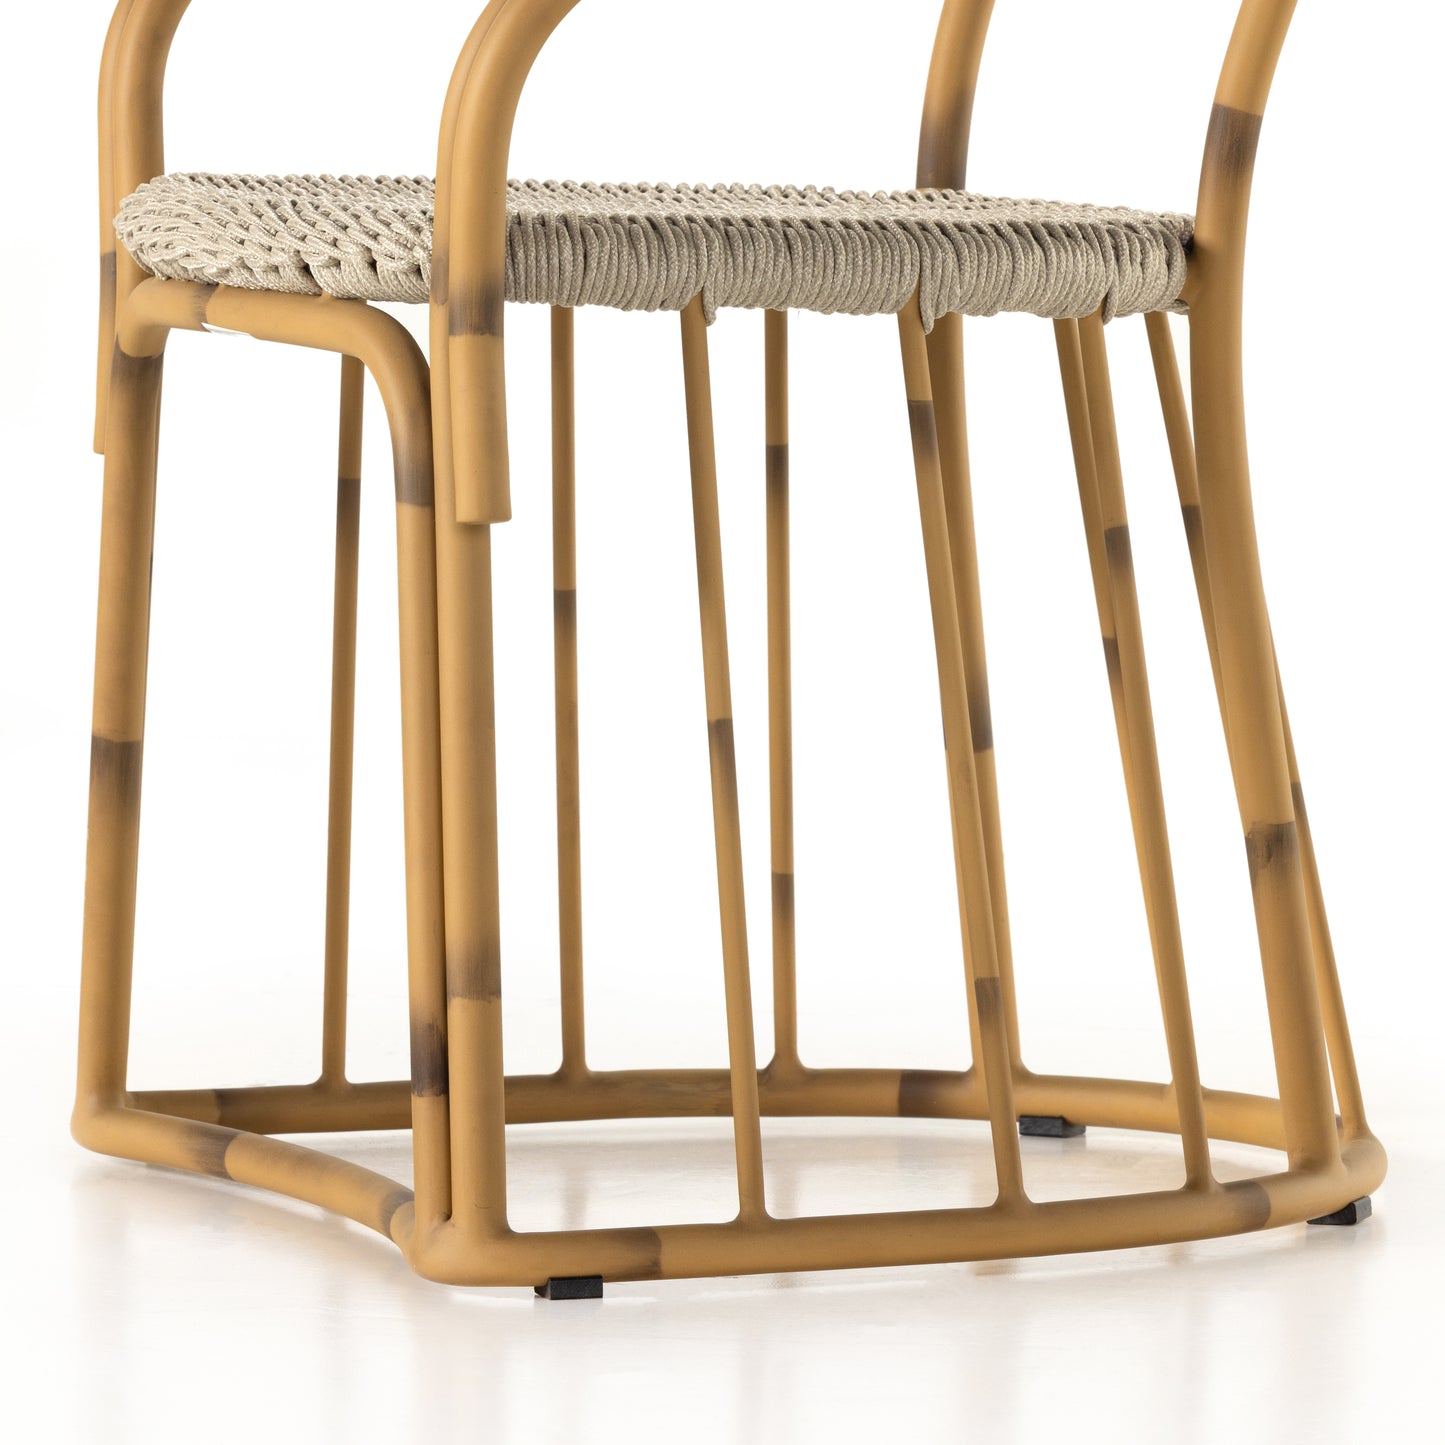 Vago Outdoor Dining Chair - Painted Ratten Outdoor Seating Four Hands     Four Hands, Mid Century Modern Furniture, Old Bones Furniture Company, Old Bones Co, Modern Mid Century, Designer Furniture, https://www.oldbonesco.com/